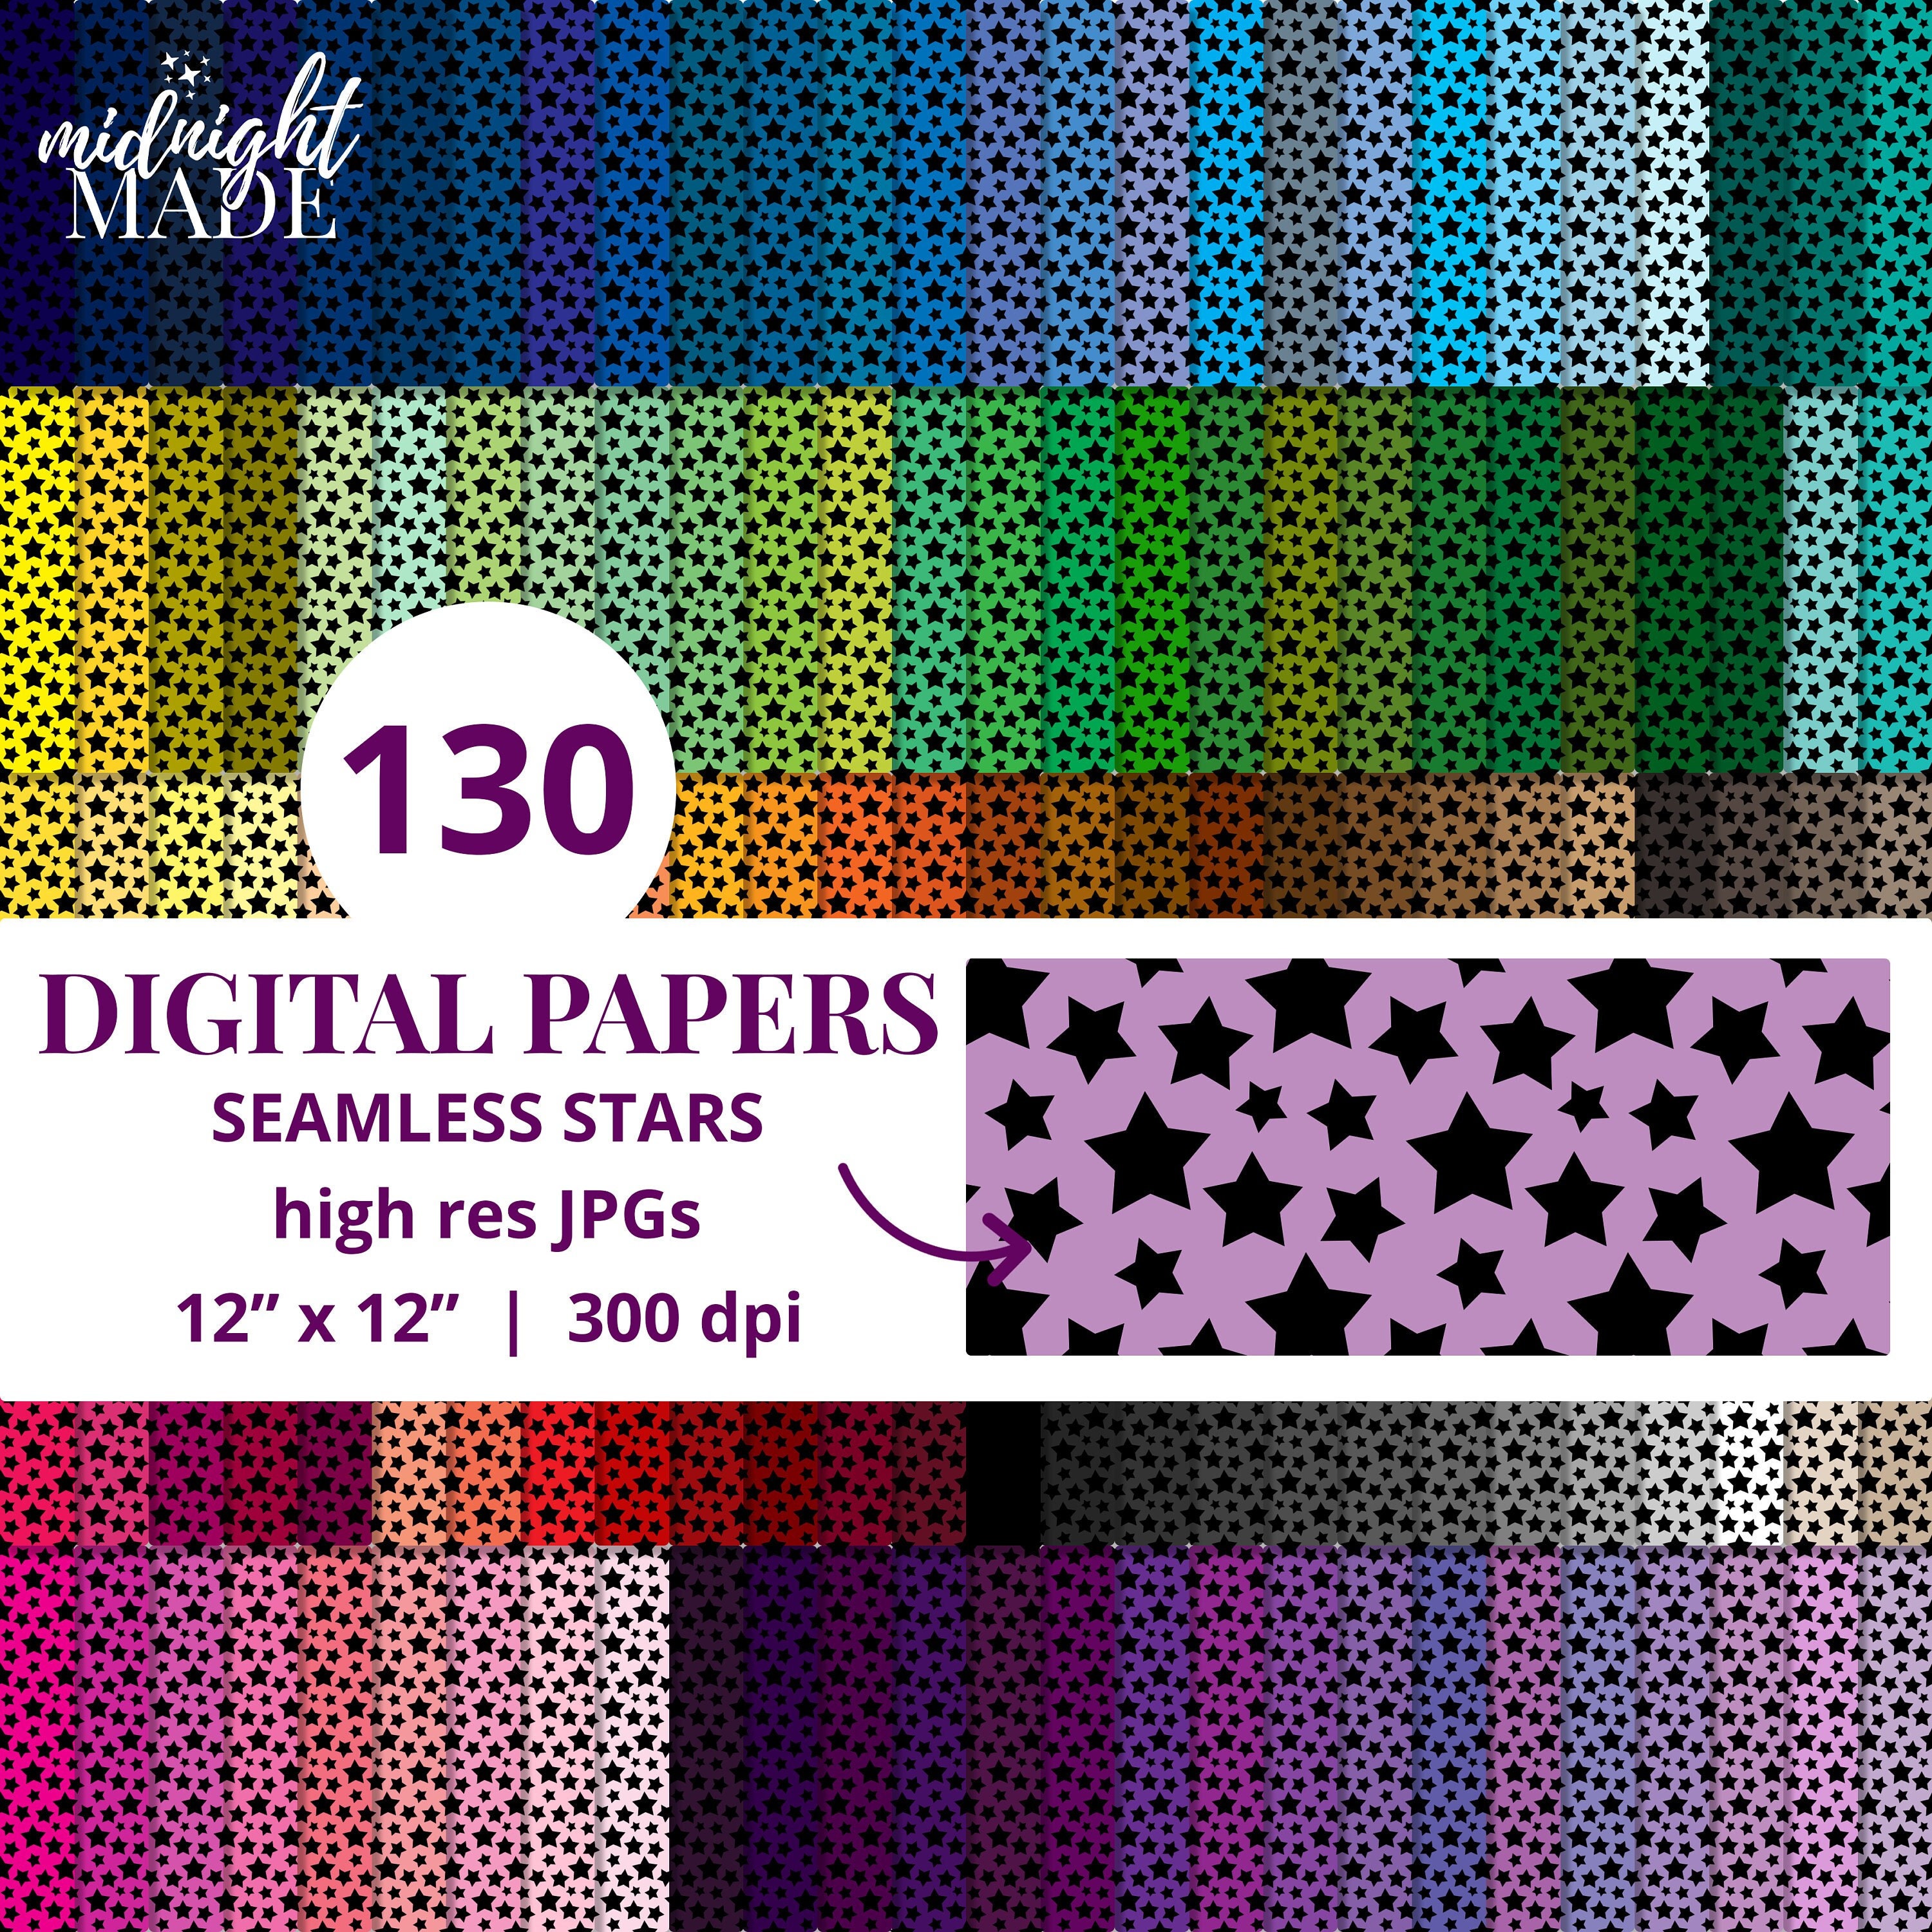 Black Stars Digital Paper Pack Commercial Use Rainbow Mini Star Seamless Pattern Background Craft Bundle Download 130 High Res JPGs